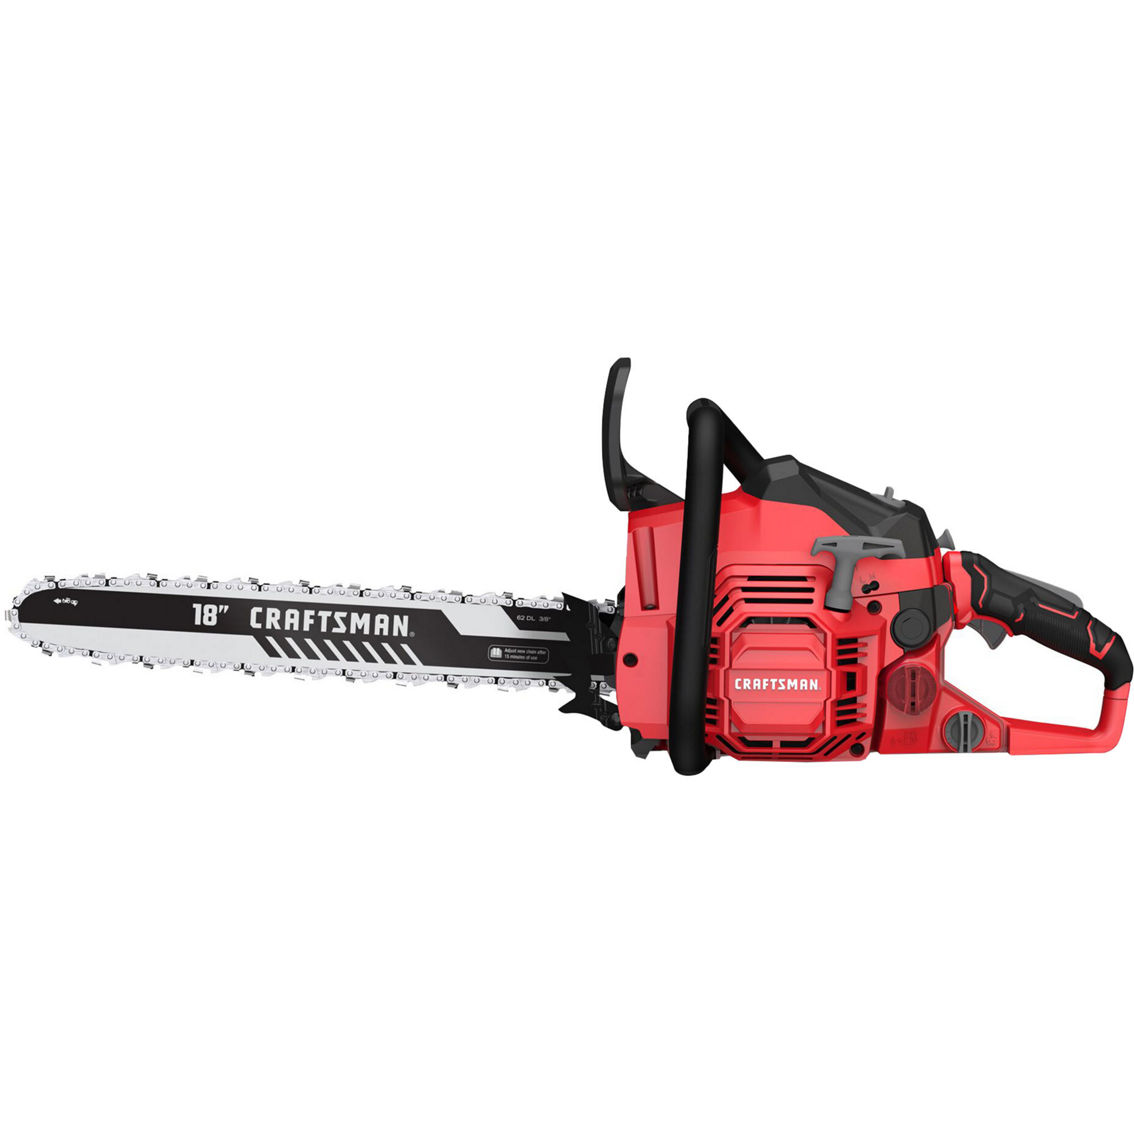 Craftsman 18 in. 42 cc 2-Cycle Gas Chainsaw - Image 2 of 6